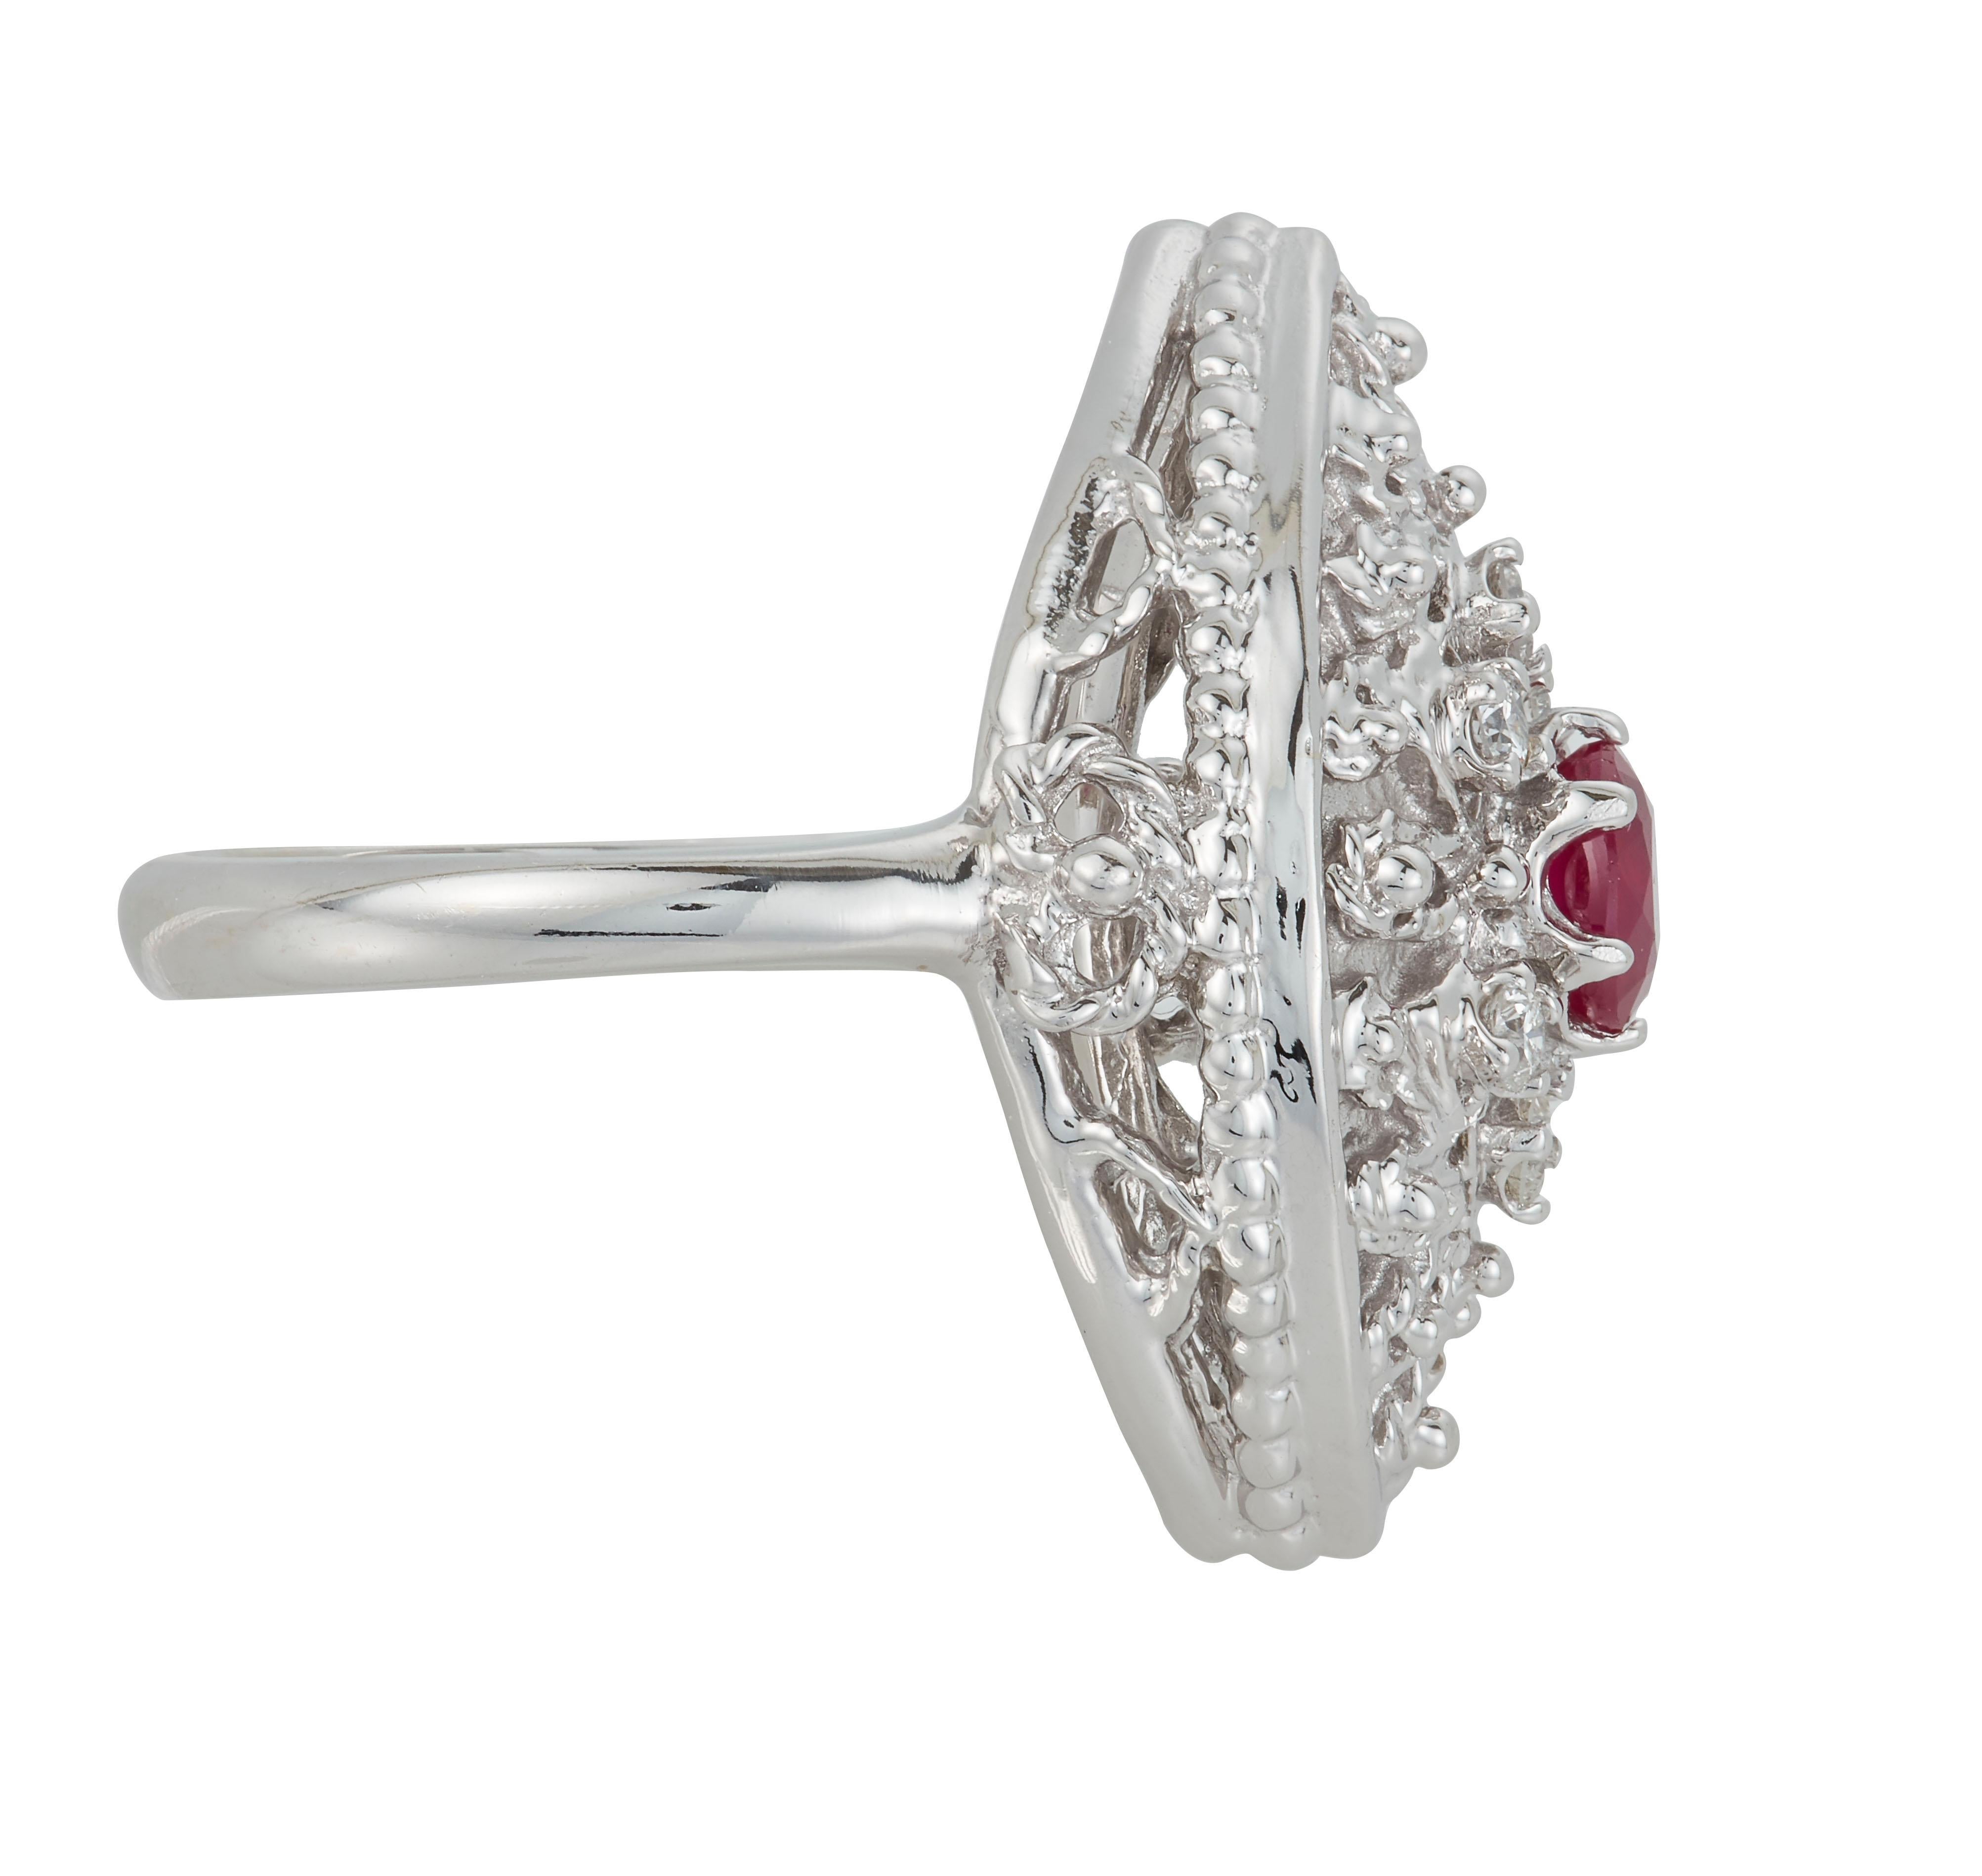 Metal: 14K White Gold
Center Stone: 1 Oval Ruby 0.57 carats - measuring 4.2 x 5 millimeters
Side Stones: 6 Round Brilliant White Diamonds at 0.19 carats total weight
Clarity: SI / Color: H-I

Fine one-of-a-kind craftsmanship meets incredible quality